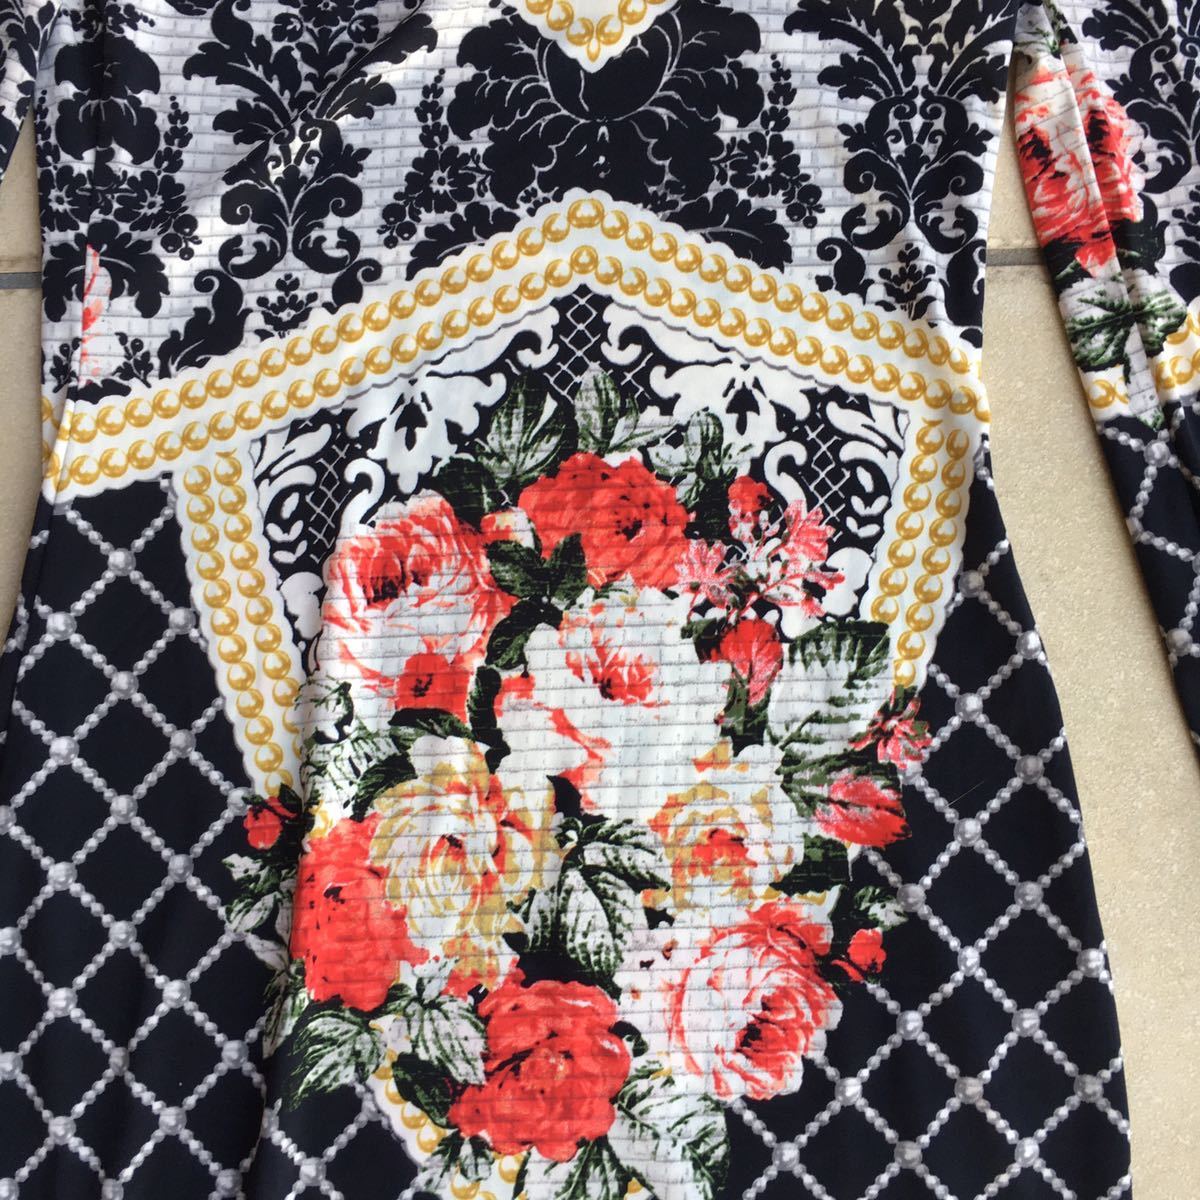  new goods tag not yet arrived TOPSHOP top shop Black Baroque Print Tapestry Bodycon Dress size UK8 US4 EUR36 black red other regular price,6.300 jpy 